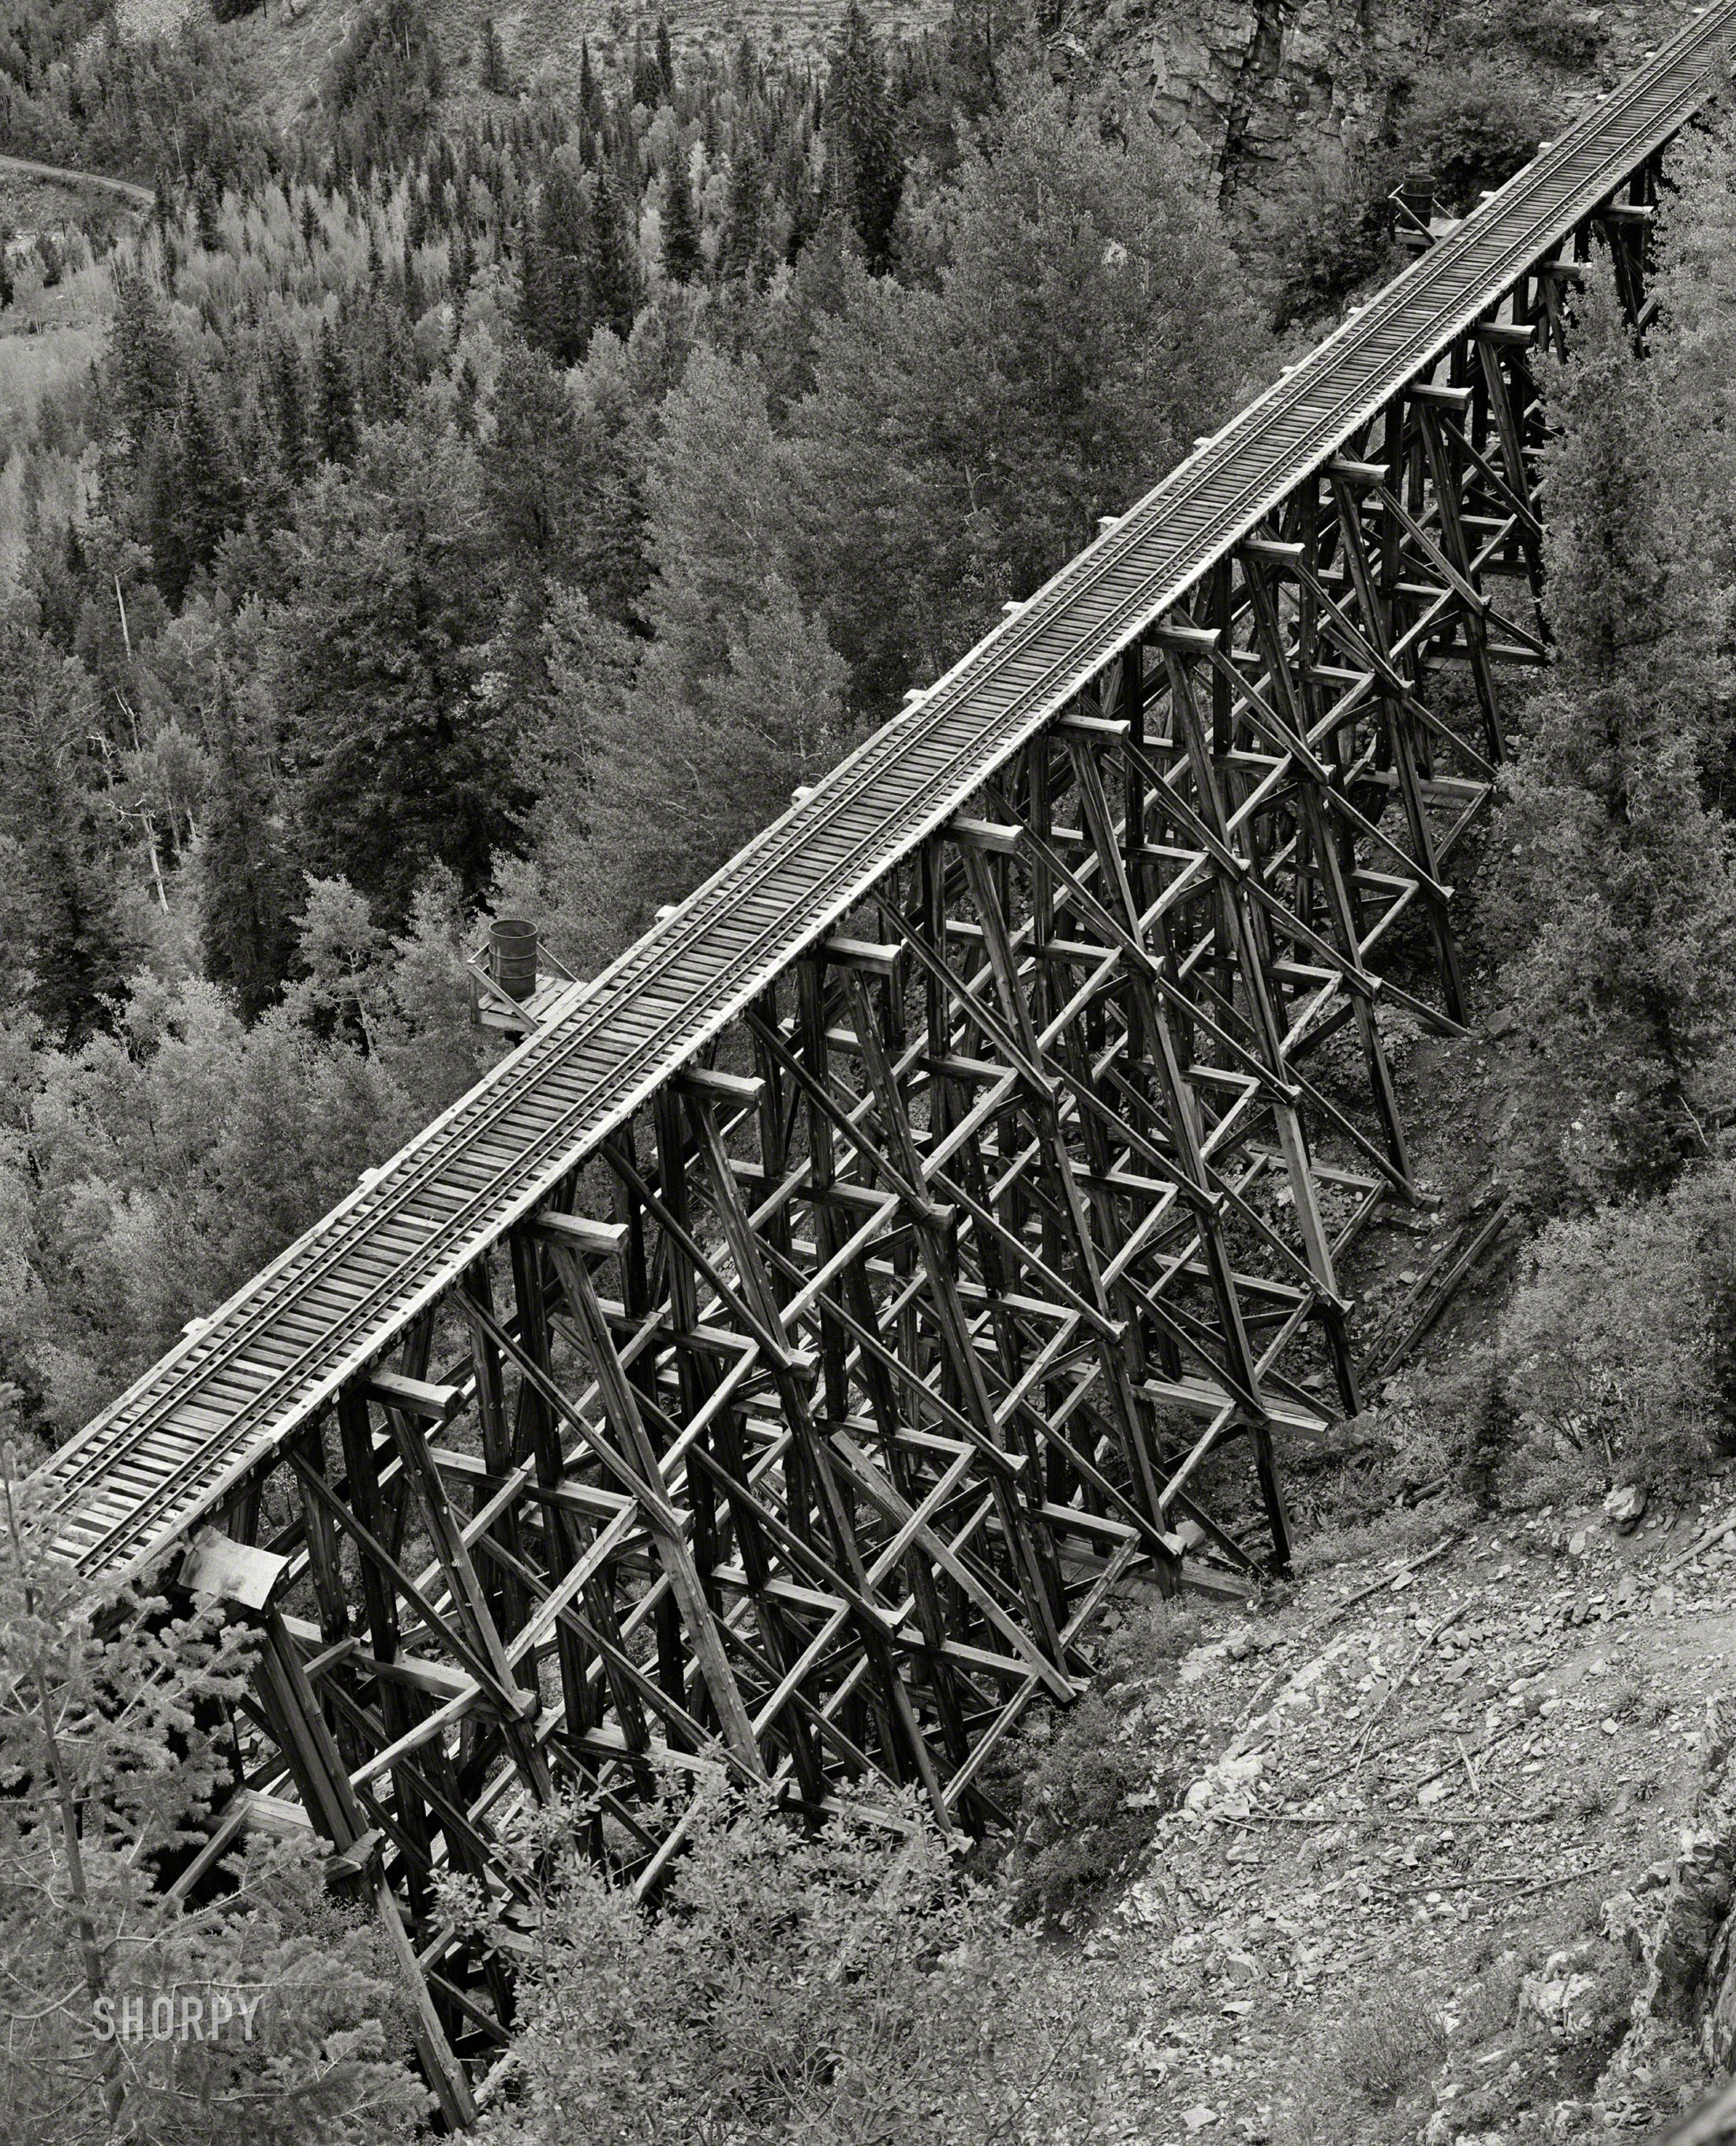 September 1940. "Trestle of narrow gauge railroad near Ophir, Colorado." Acetate negative by Russell Lee for the Farm Security Administration. View full size.